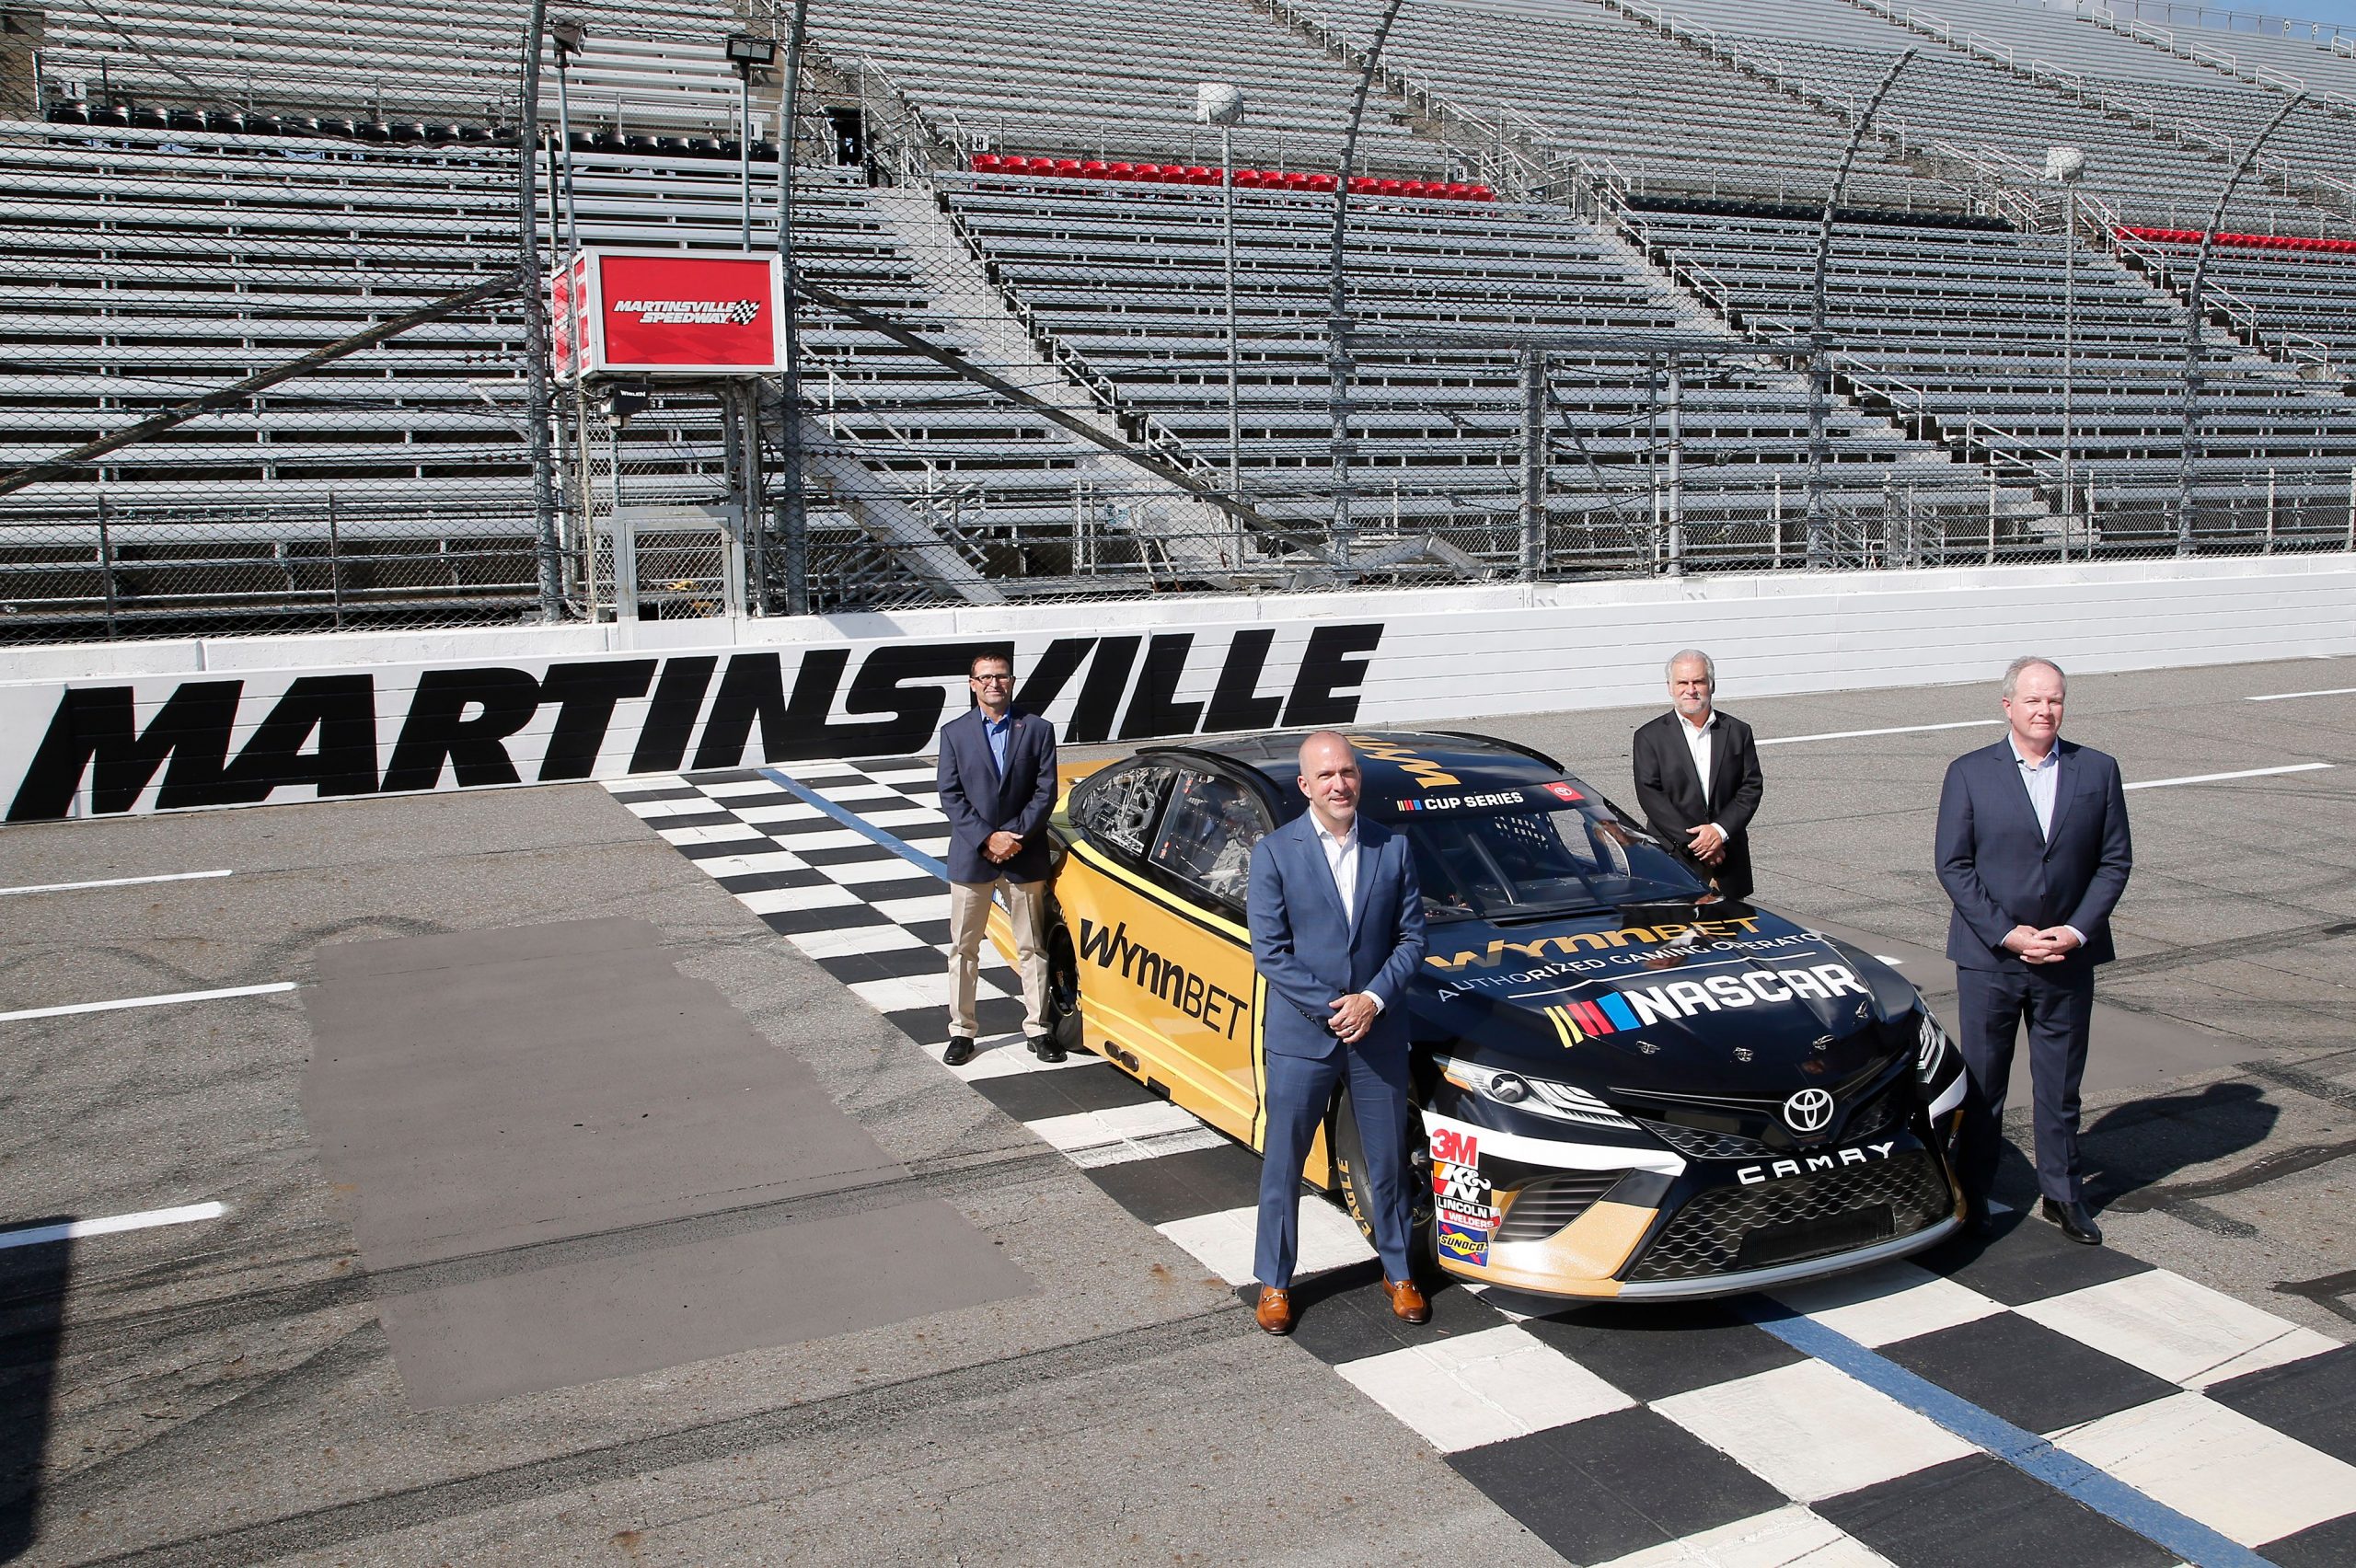 Live, in-race betting to be offered at Martinsville Speedway